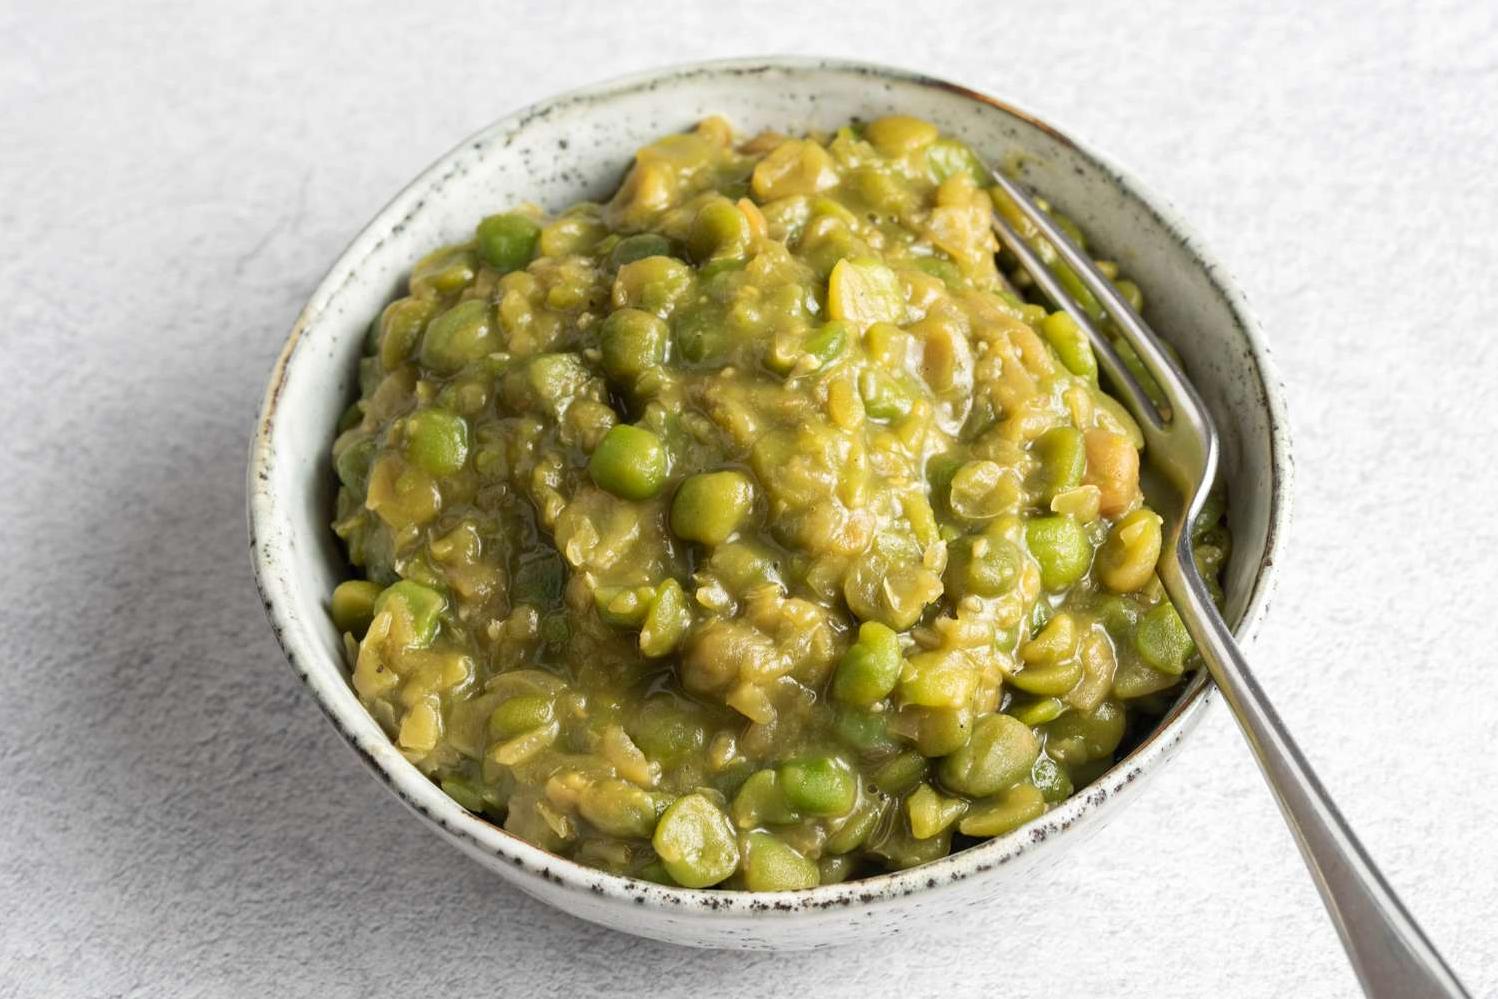  Just-plucked from the garden or picked up in a farmer's market, English peas provide the perfect pop of color to your meal.